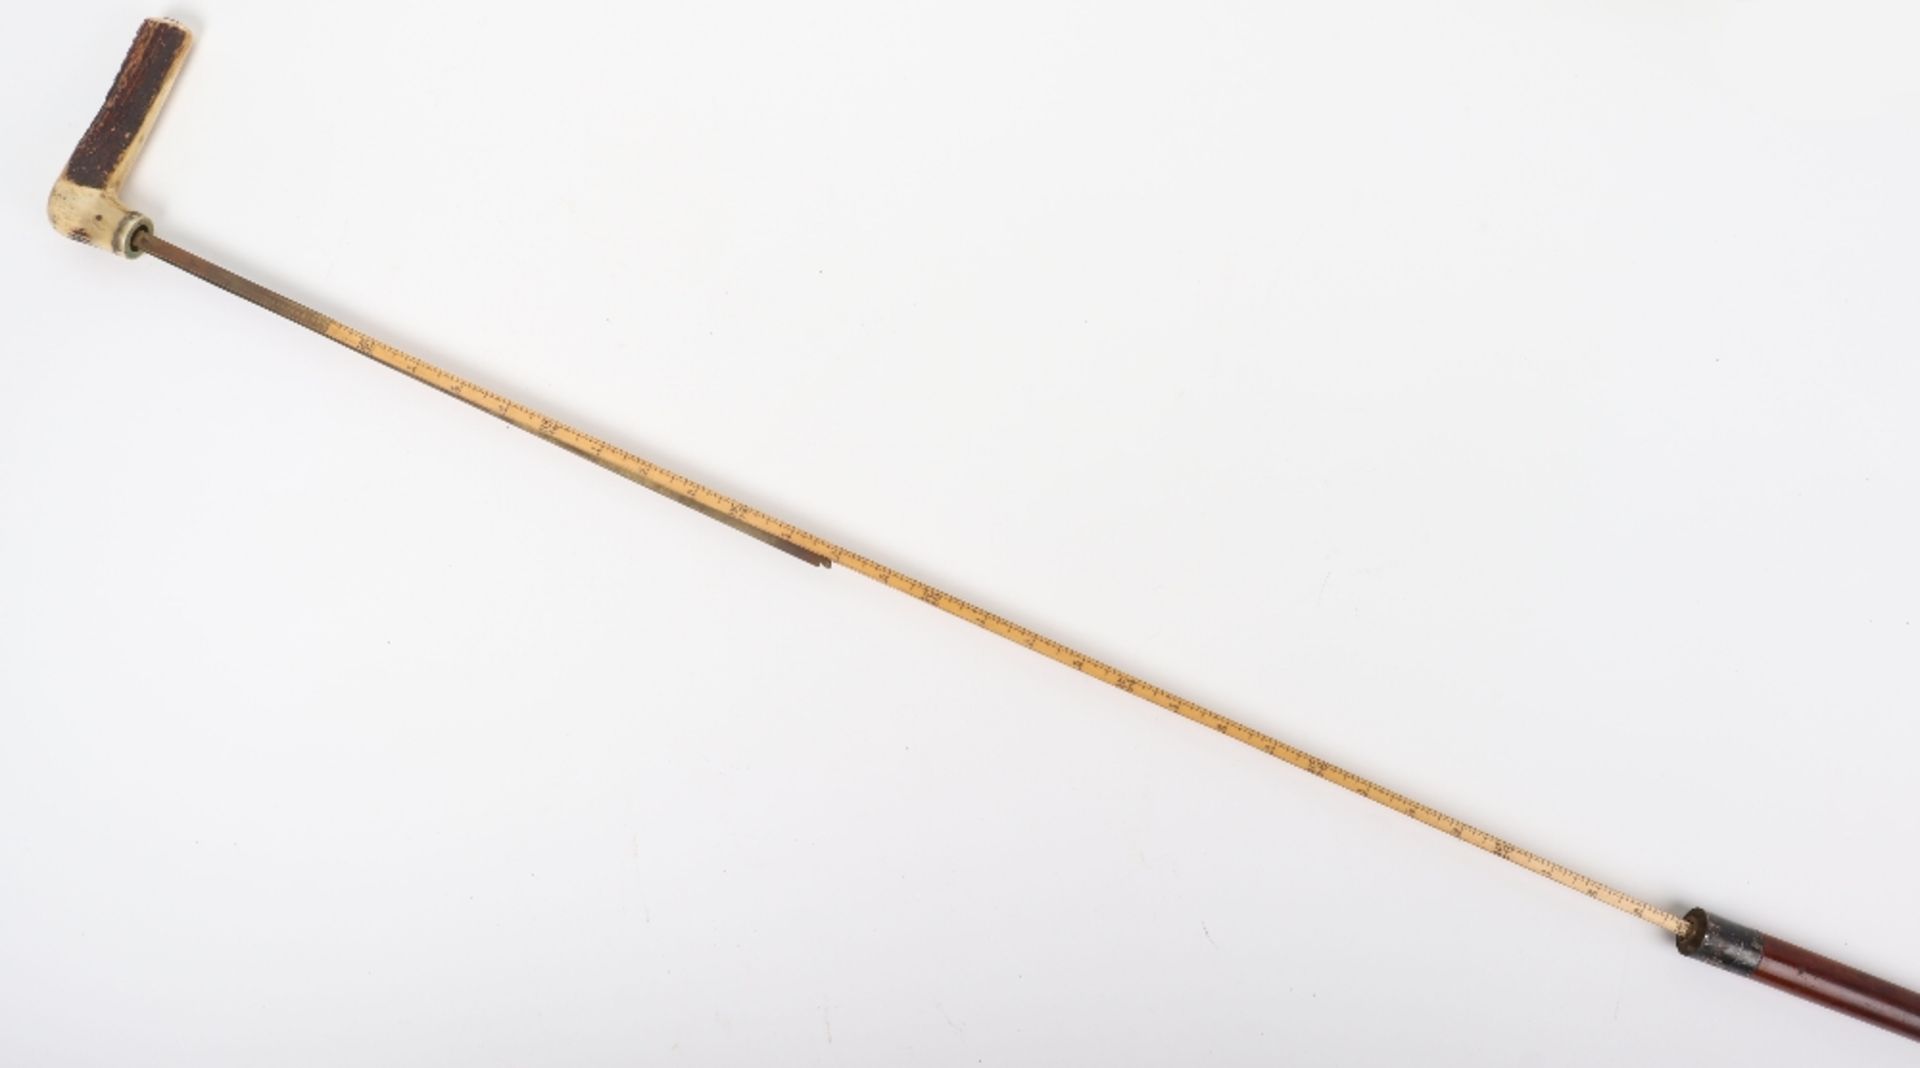 An Edwardian walking stick with spirit level (lacking liquid) and scaled ruler, with horn handle - Image 6 of 14